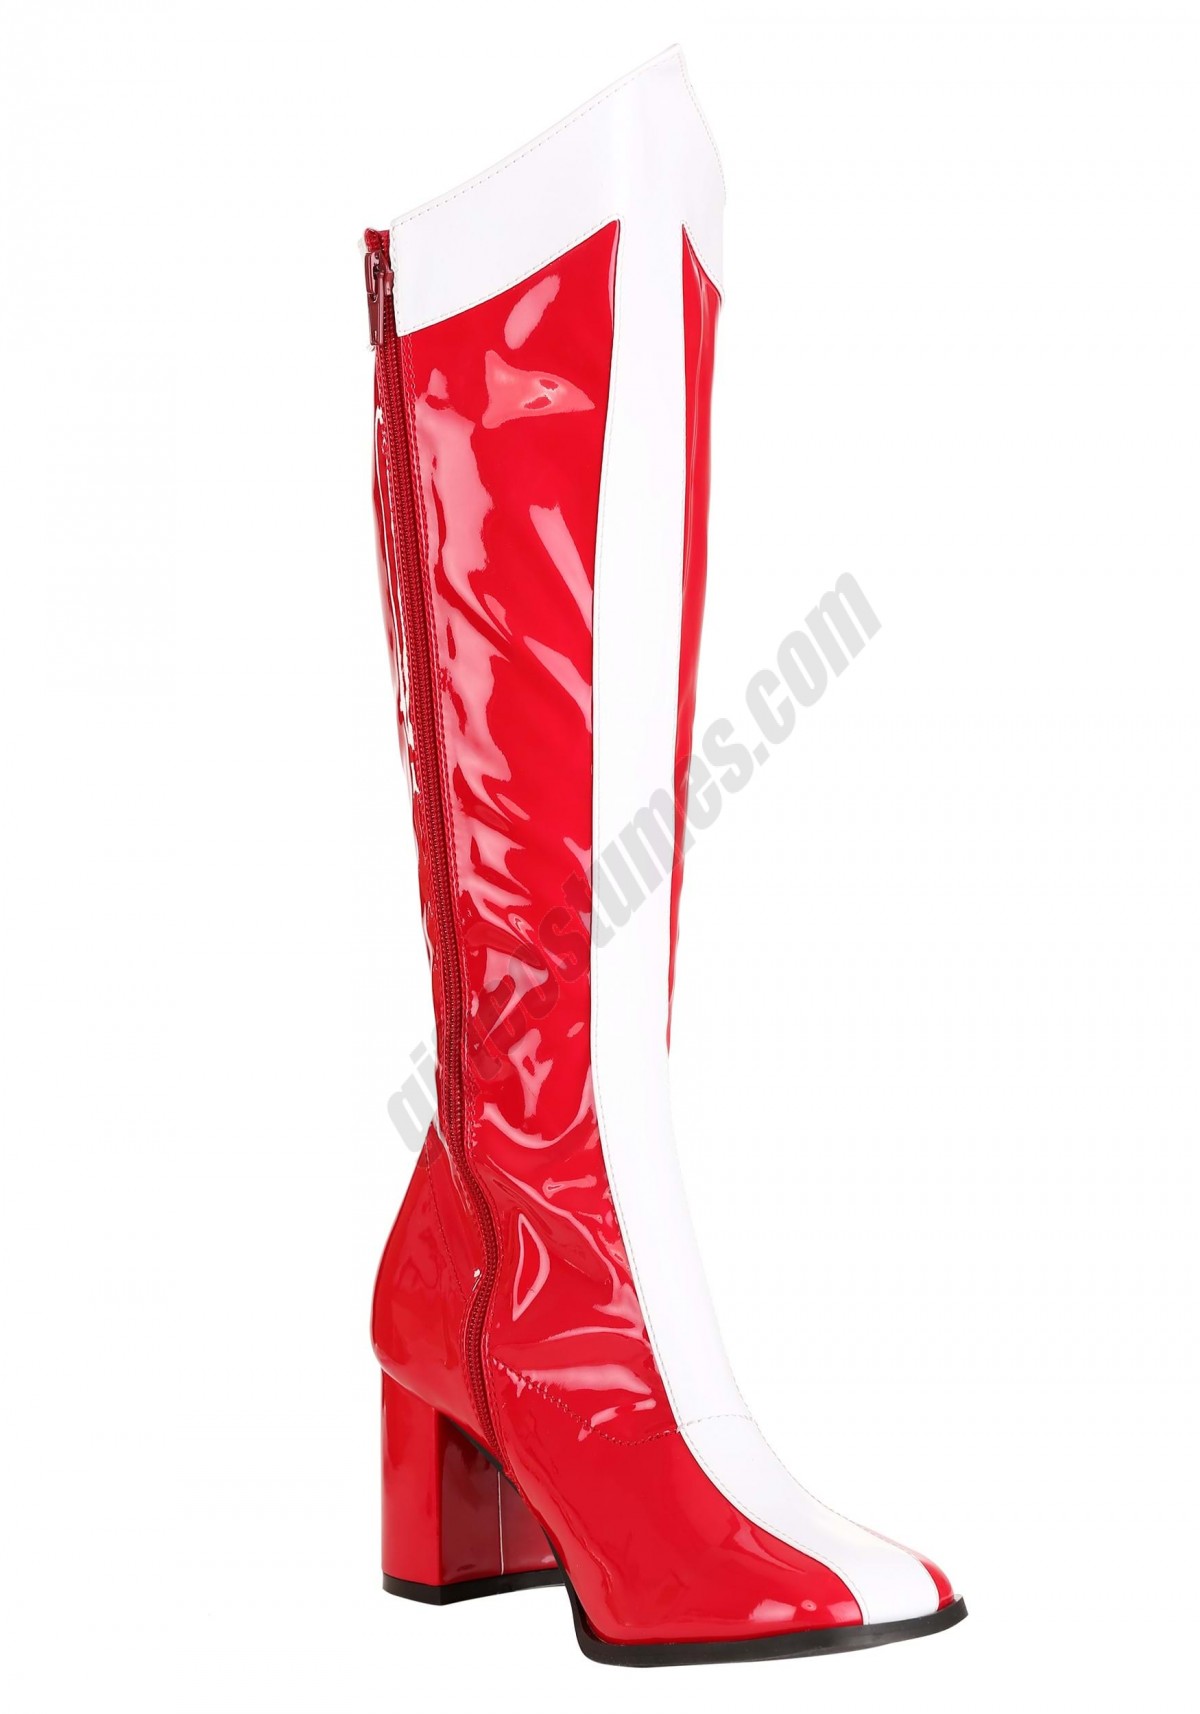 Wonderful Woman Costume Boots for Women Promotions - -2